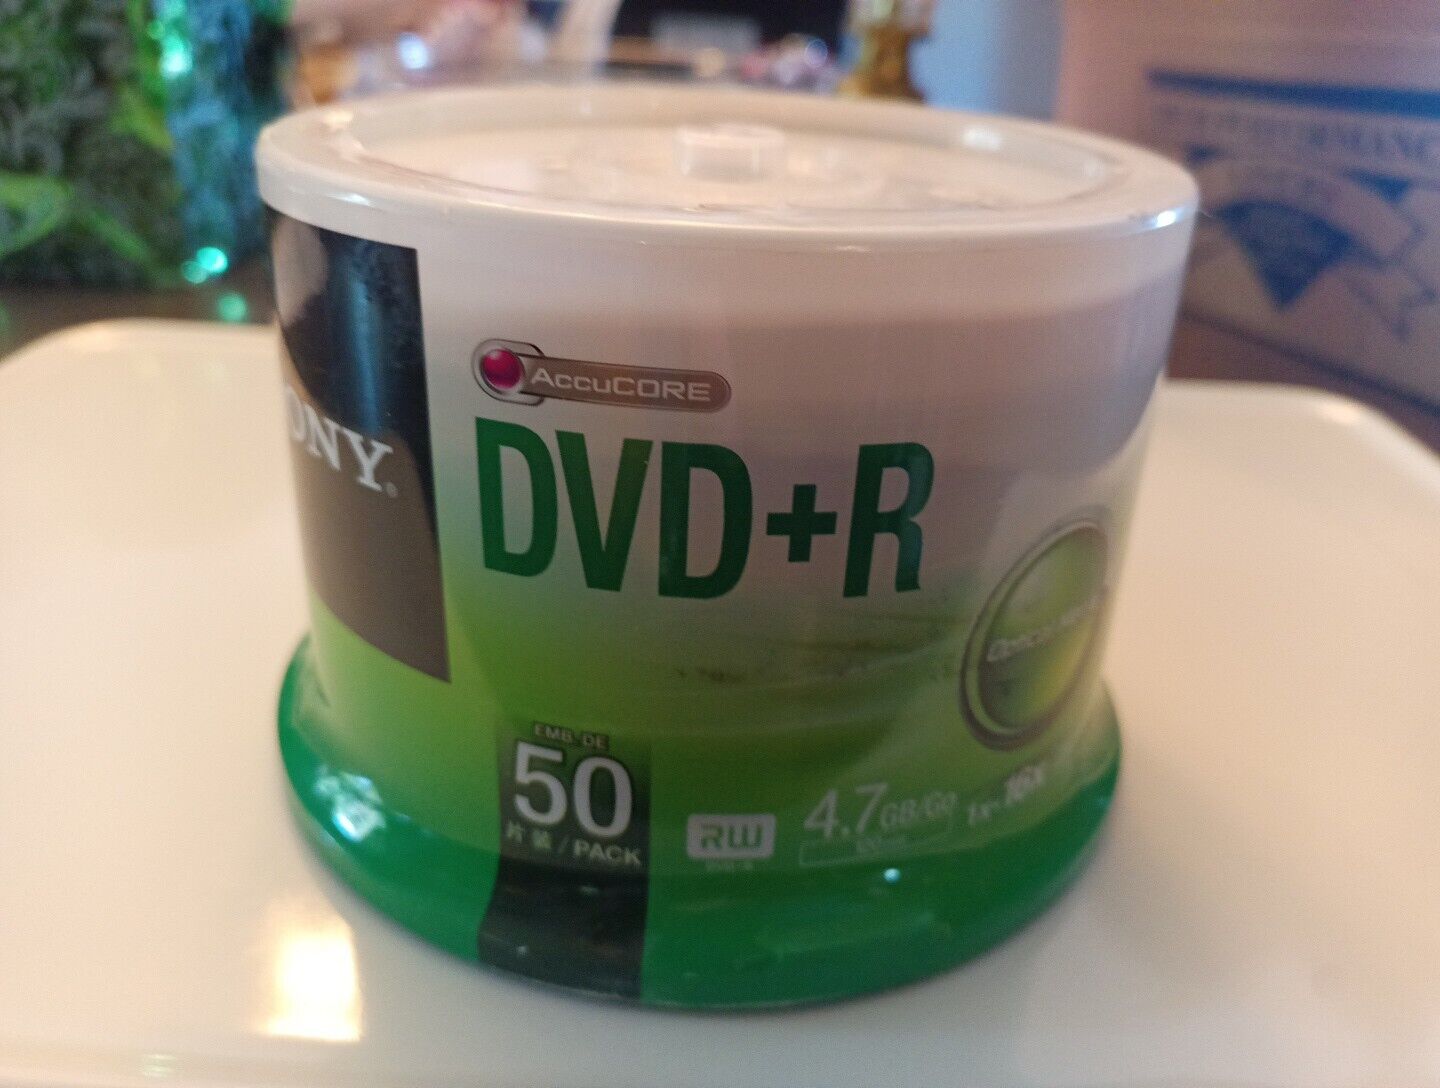 SONY DVD+R 4.7 GB Optical Media, 50 Pack 50DPR47SP Factory Sealed Fast Shipping